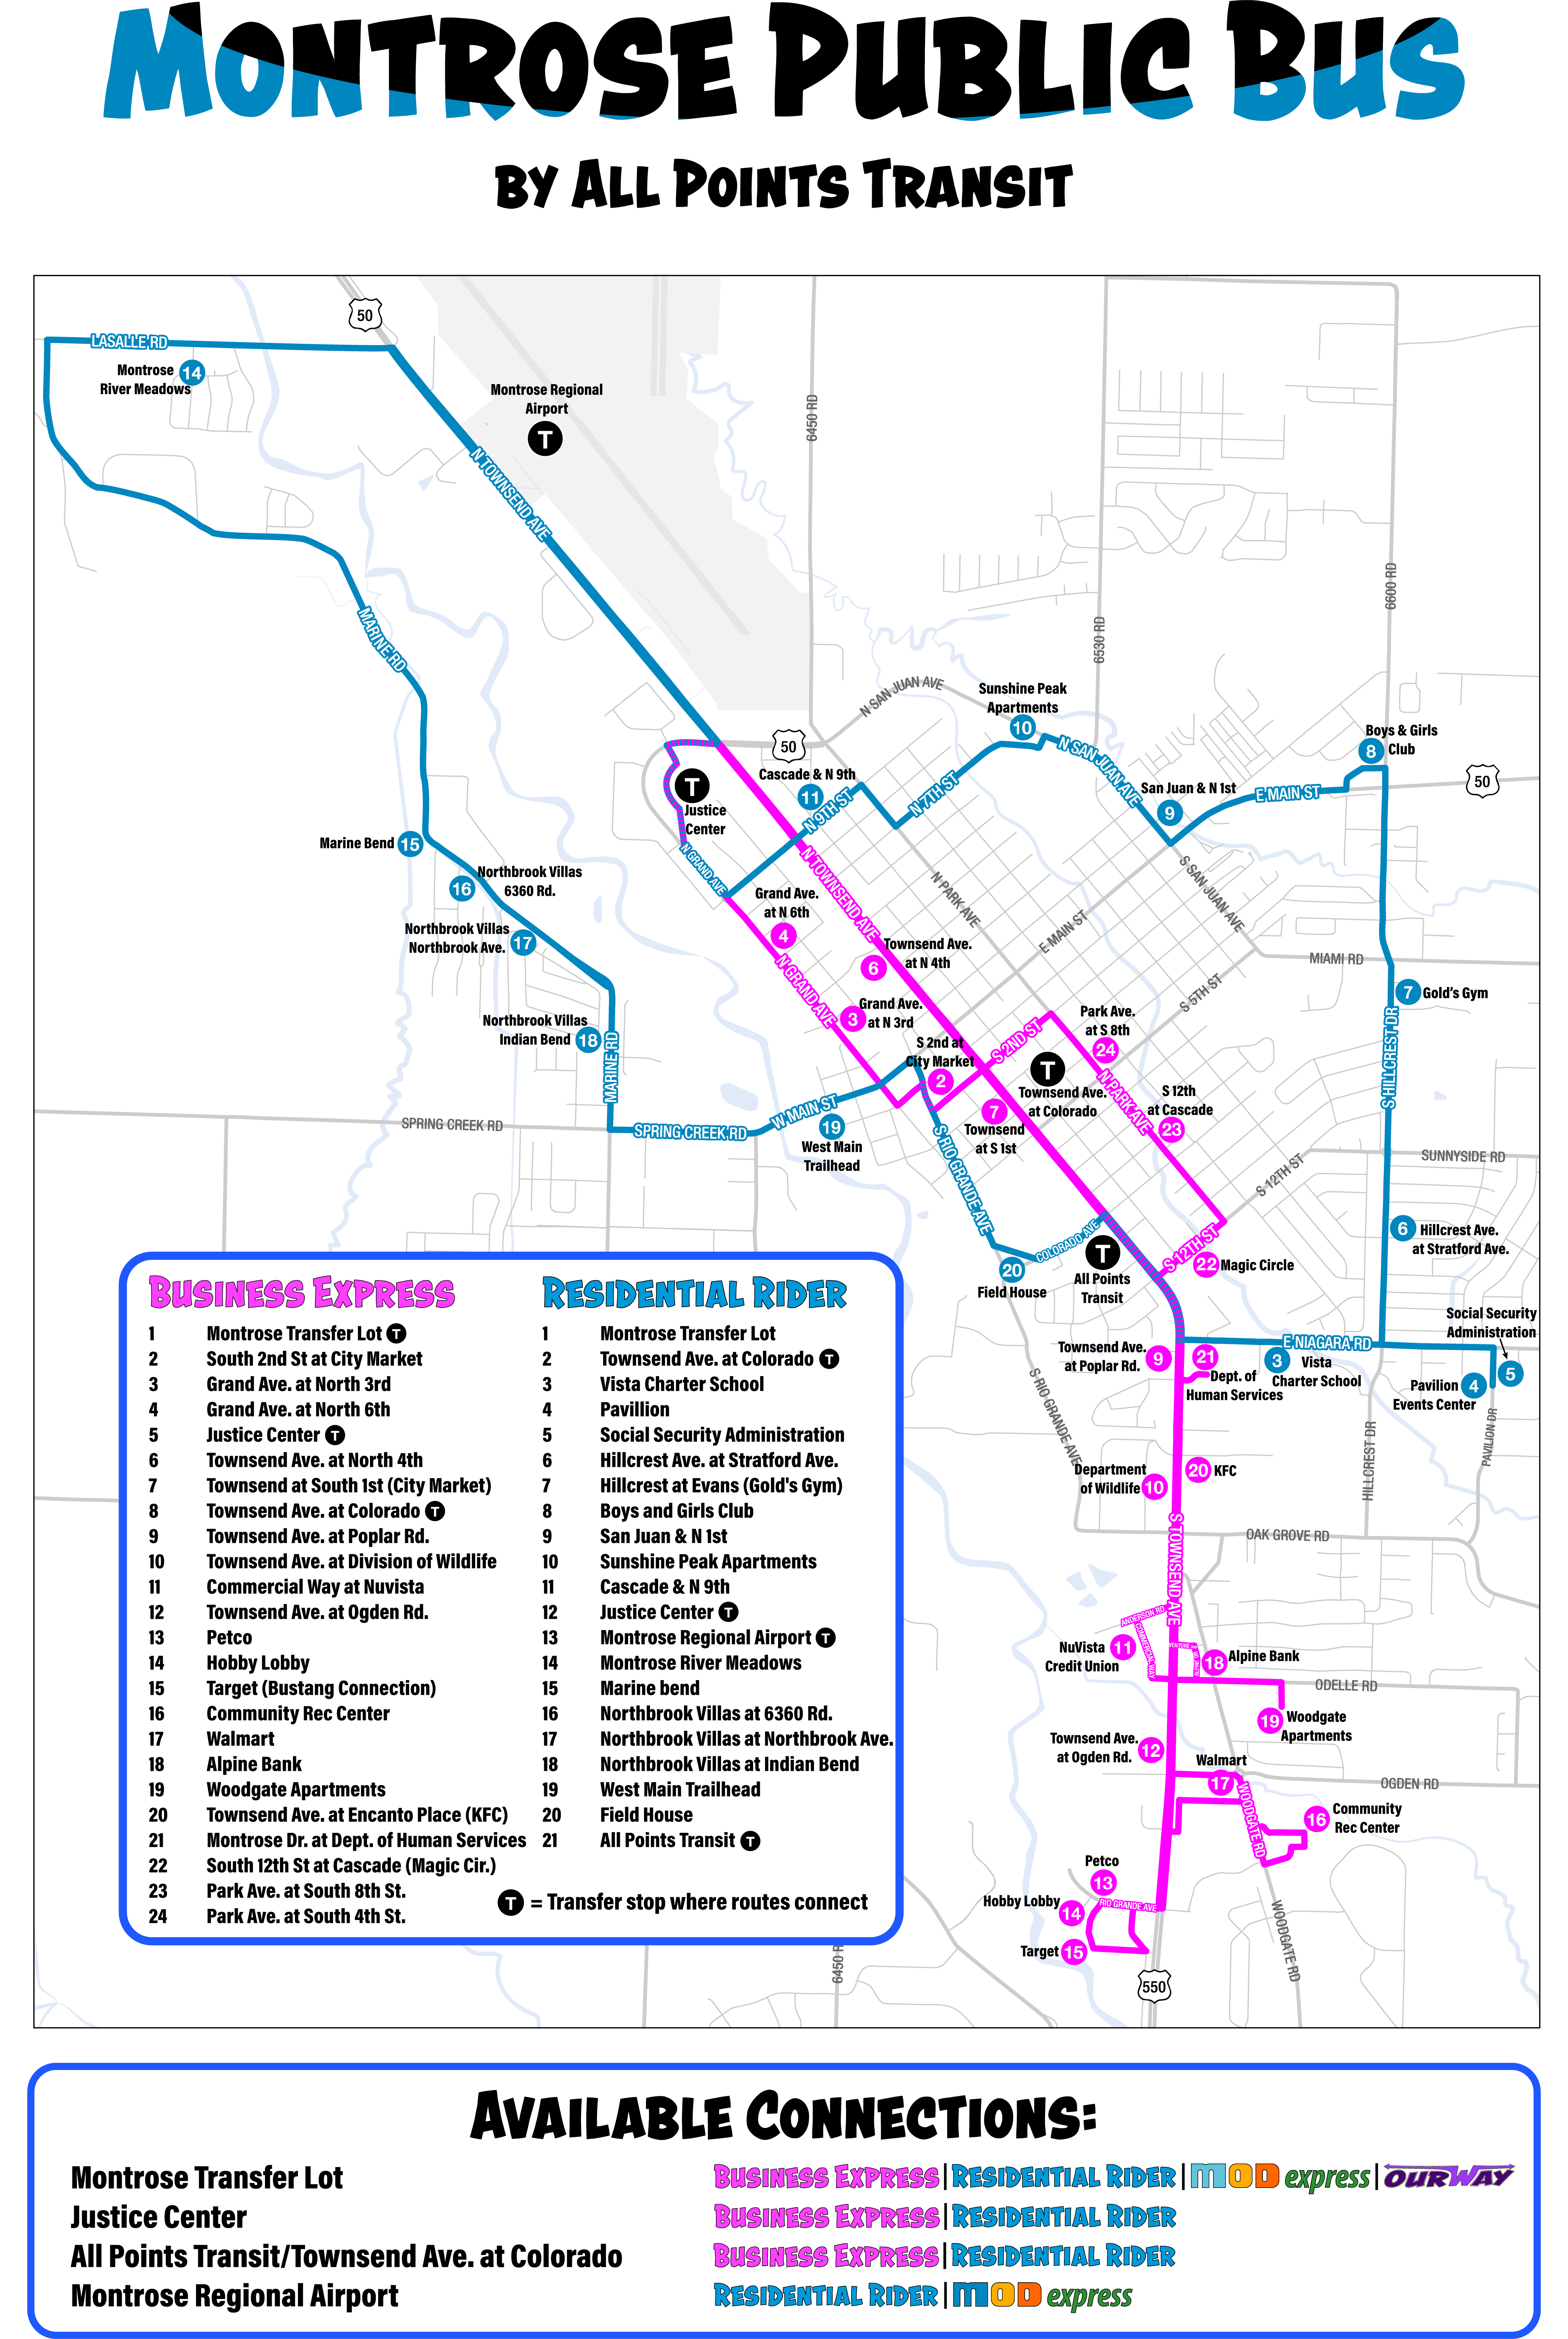 all points transit main street and townsend express public bus route map and schedule